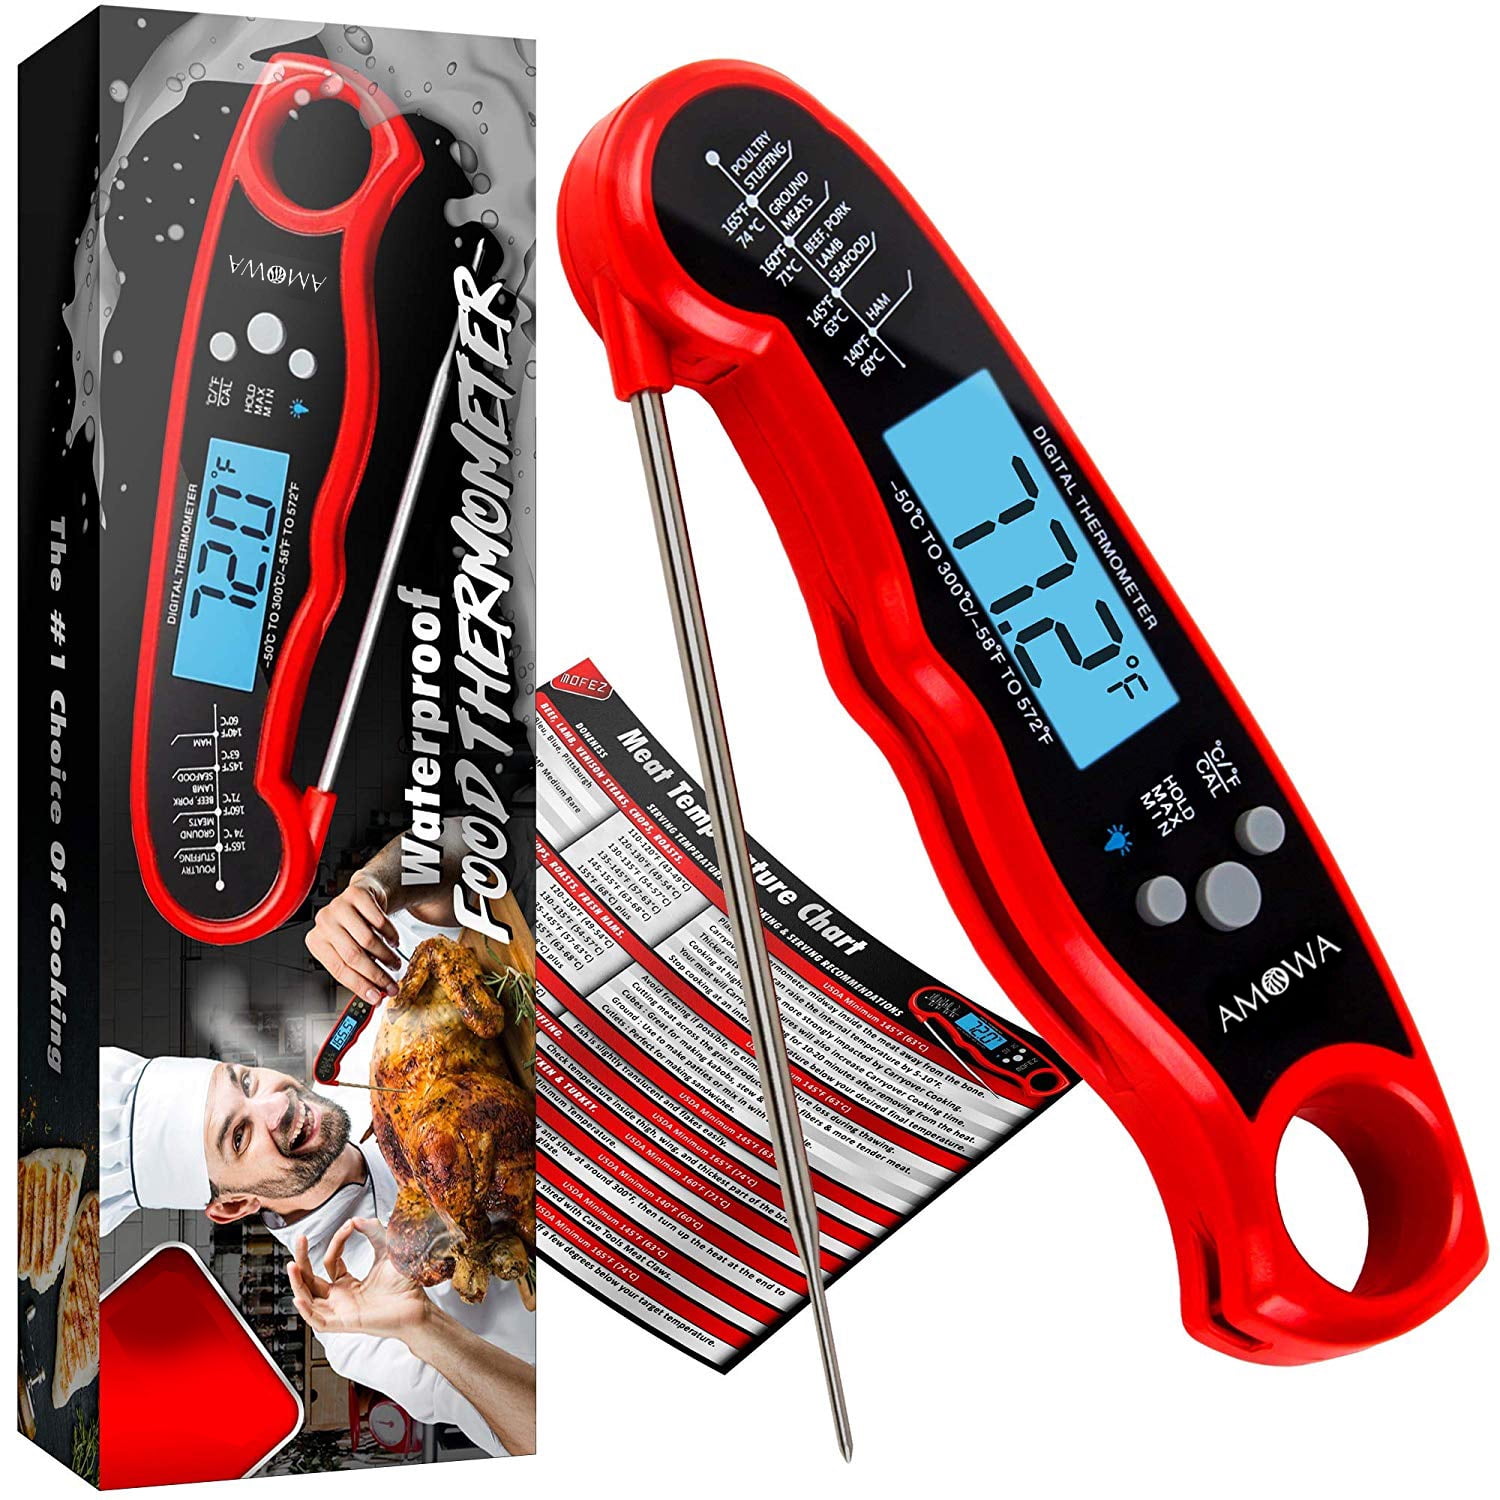 Easy to Use for BBQ FDA Approved Calibration Grilling Baking Digital Meat Thermometer Instant Read by Basics Additions USA Cooking Waterproof Backlit and Hold Functions 